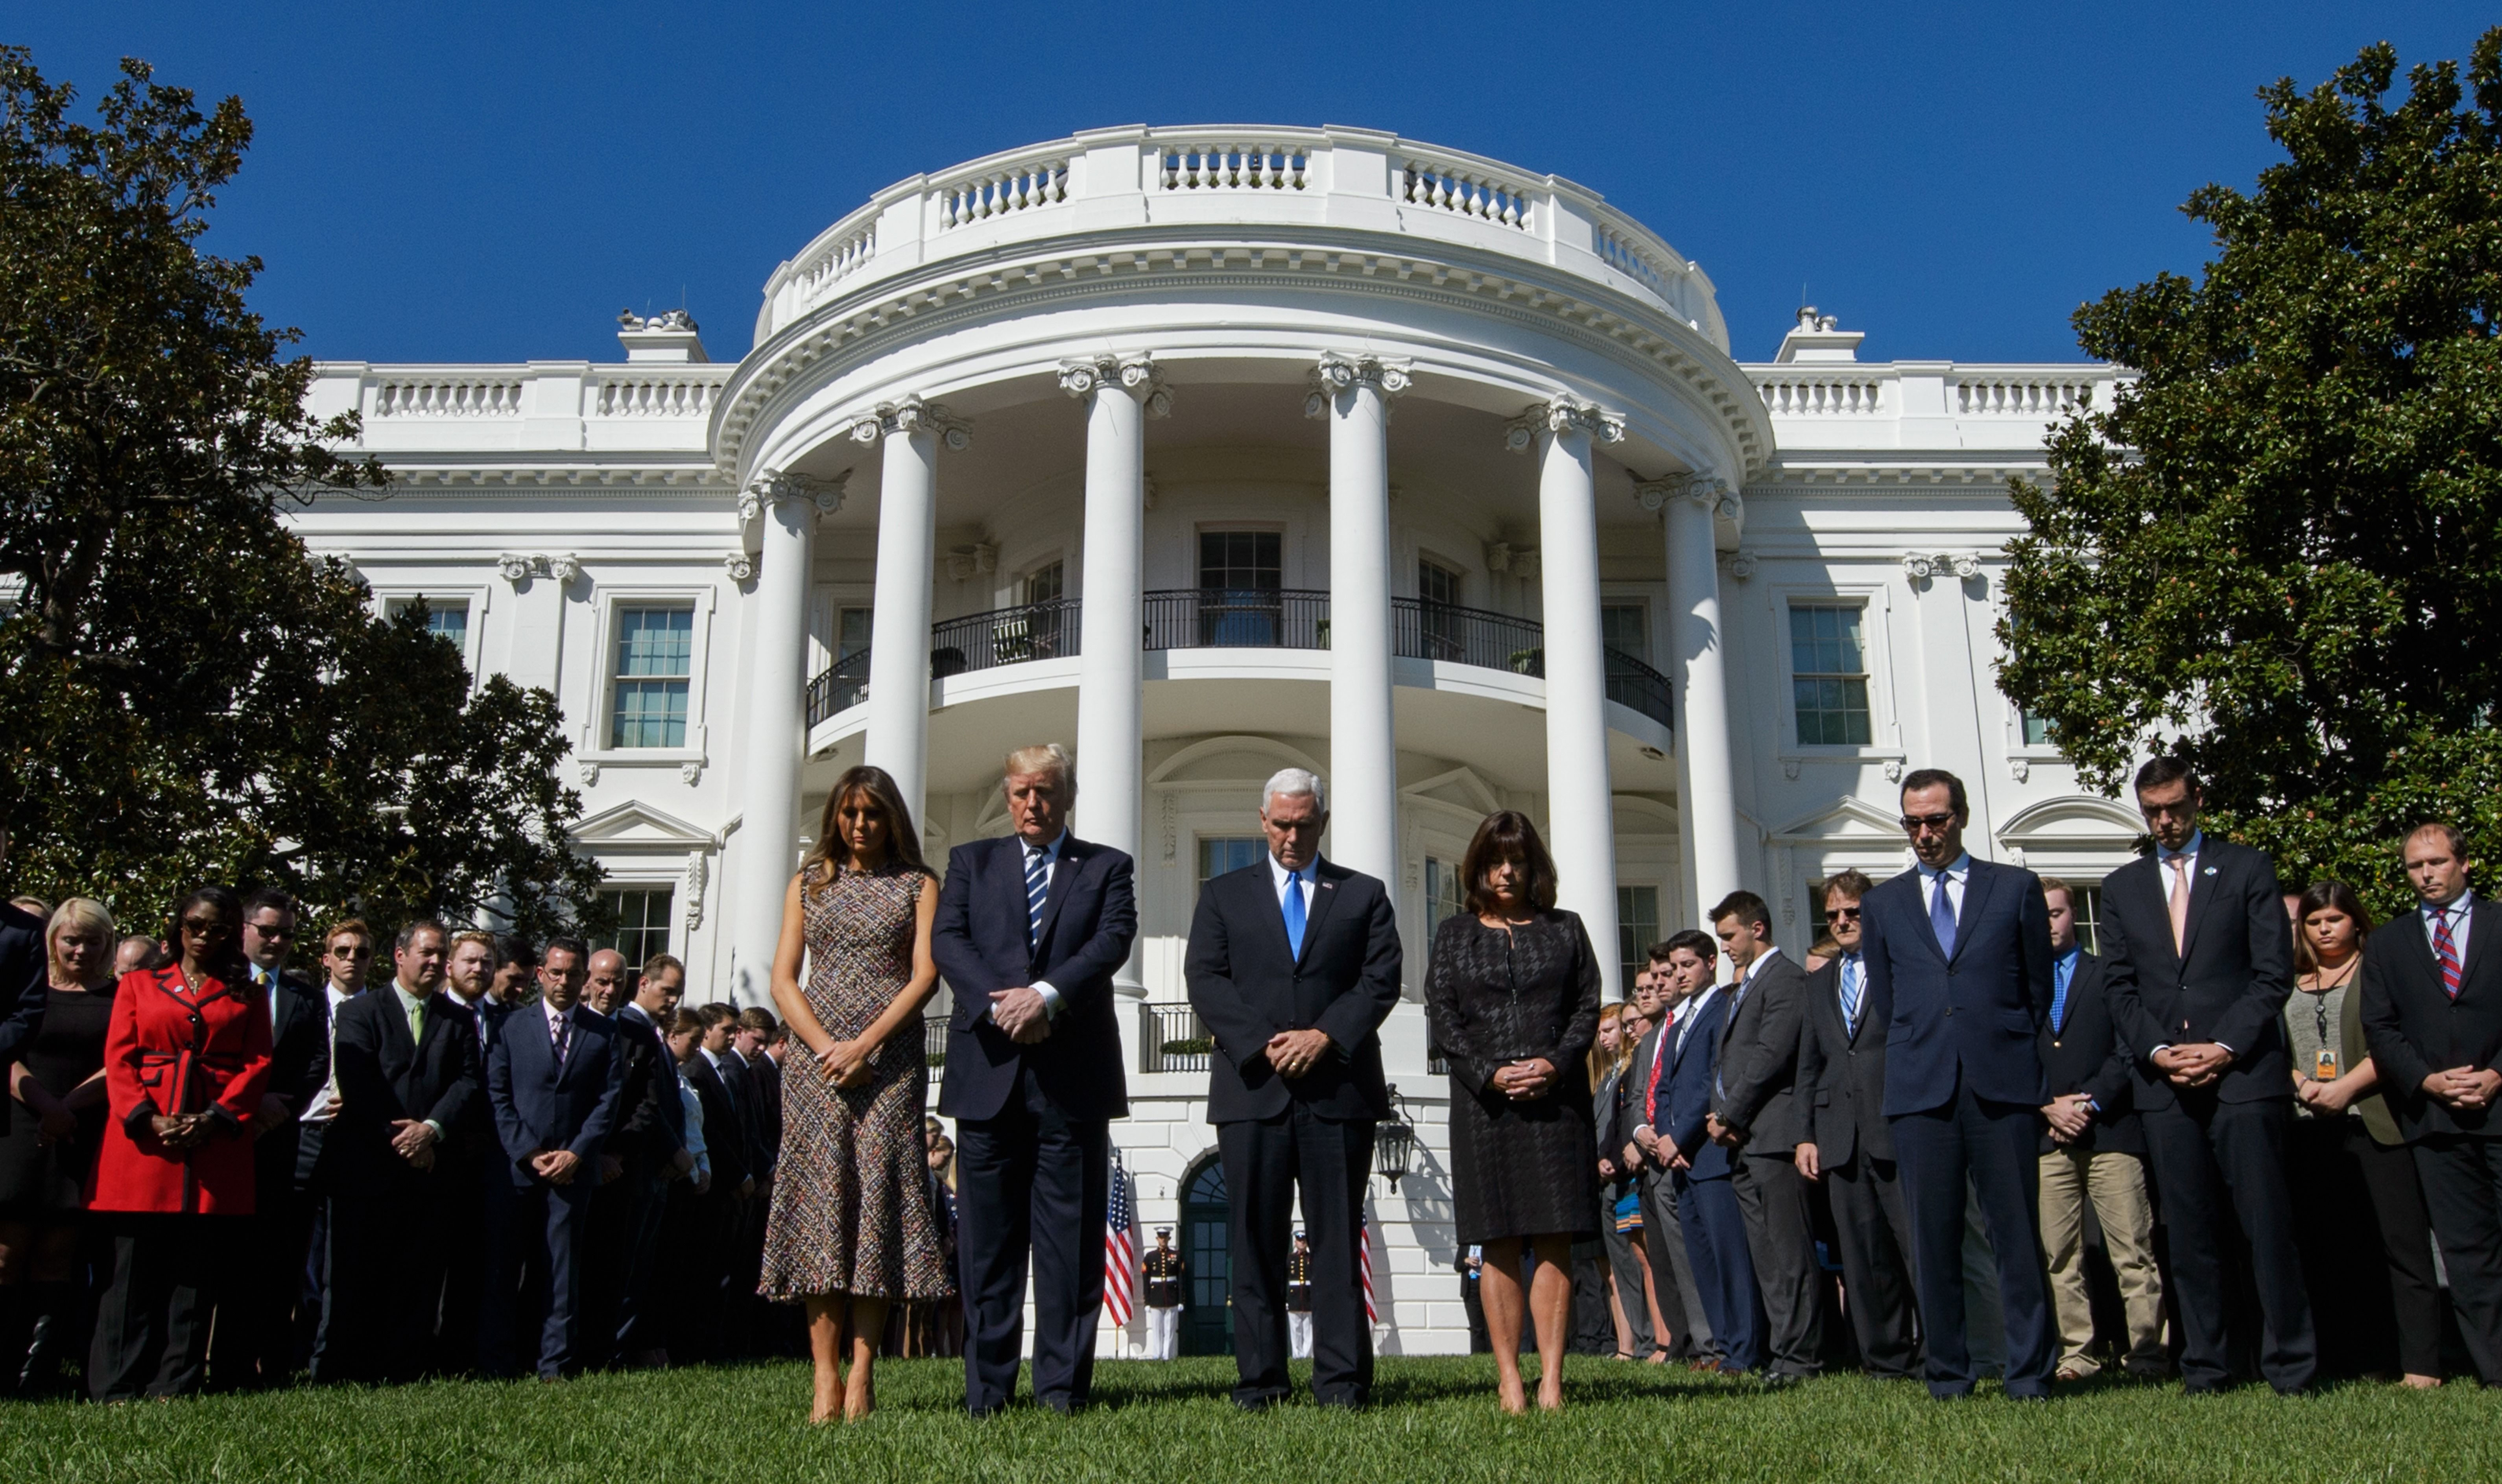 The White House holds a moment of silence on the South Lawn for the victims of the Las Vegas shooting.